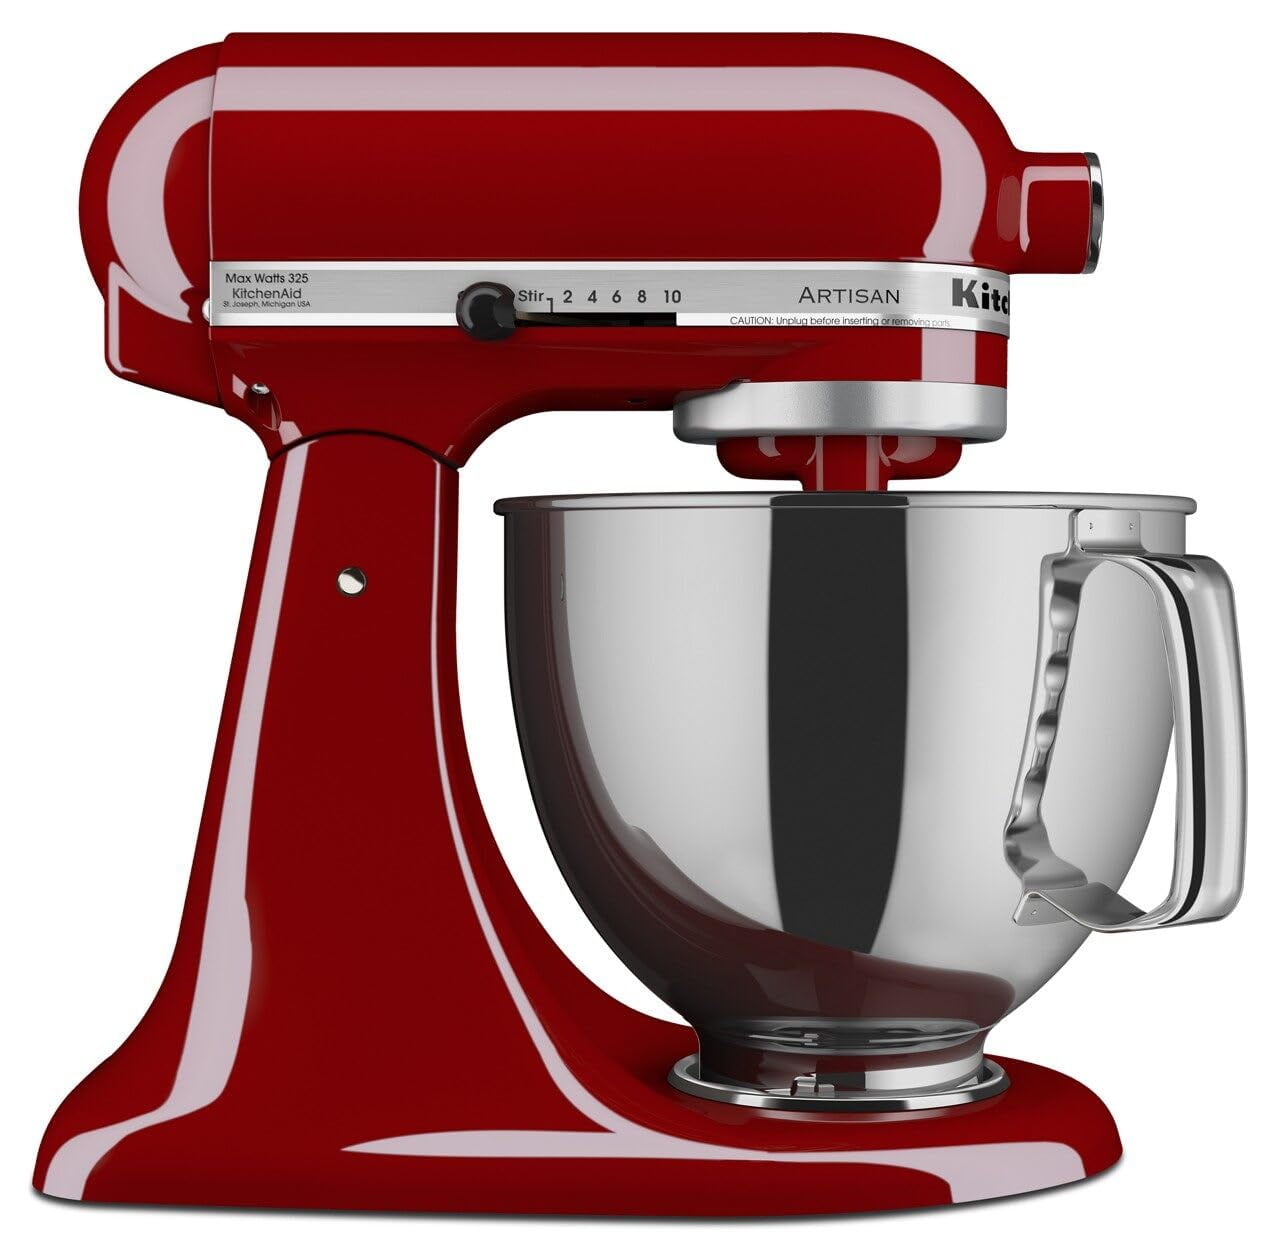 KitchenAid Secure Fit Pouring Shield for Tilt-Head Stand Mixers + Reviews